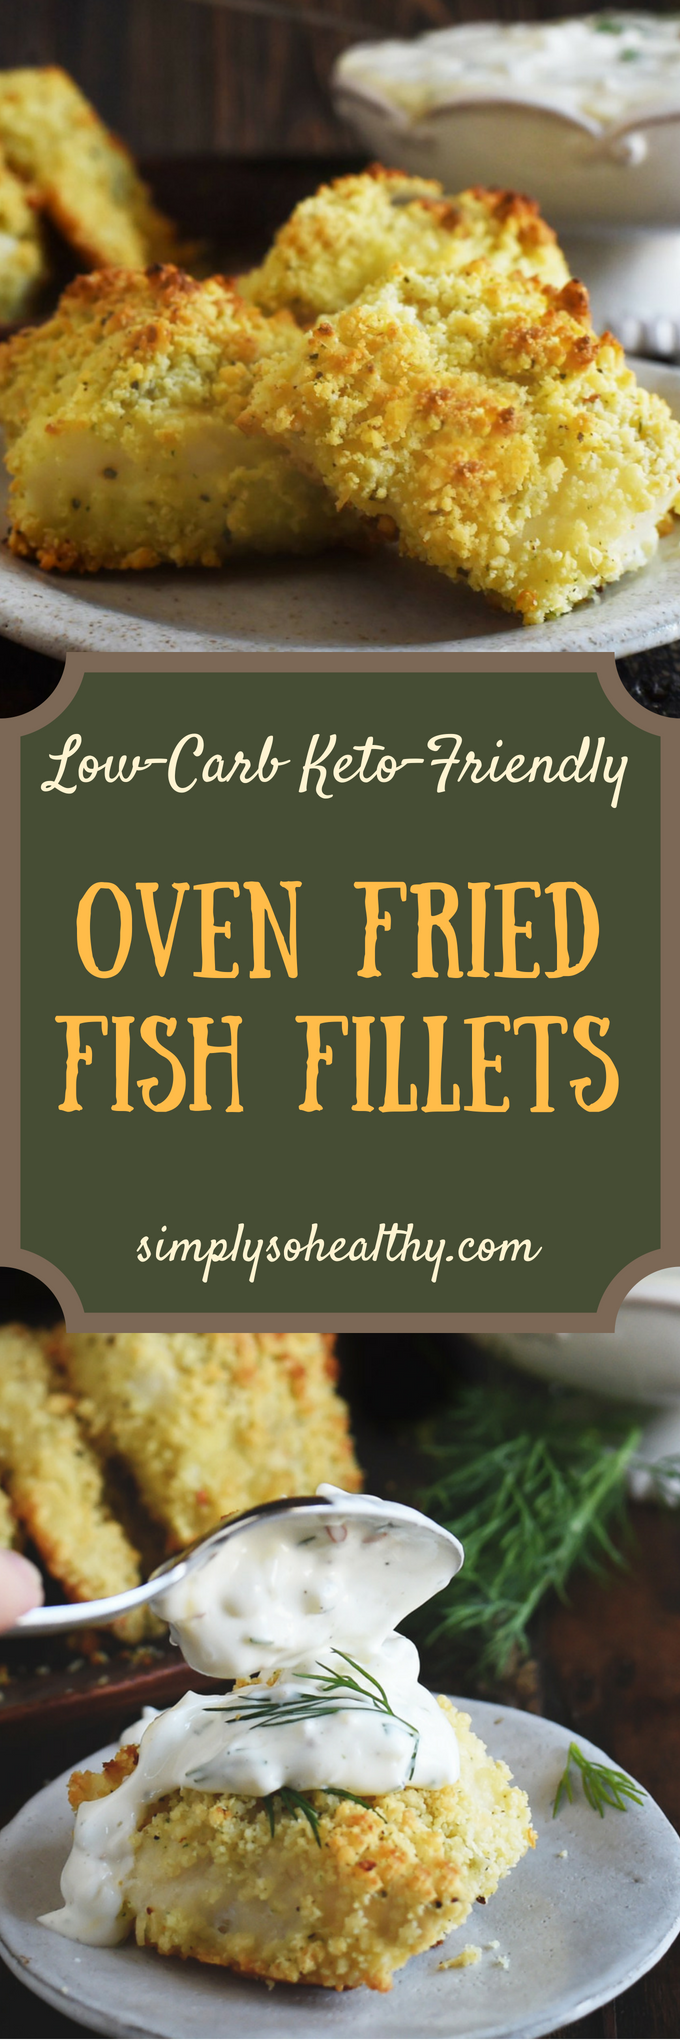 Low-Carb Oven Fried Fish Fillets Recipe - Simply So Healthy